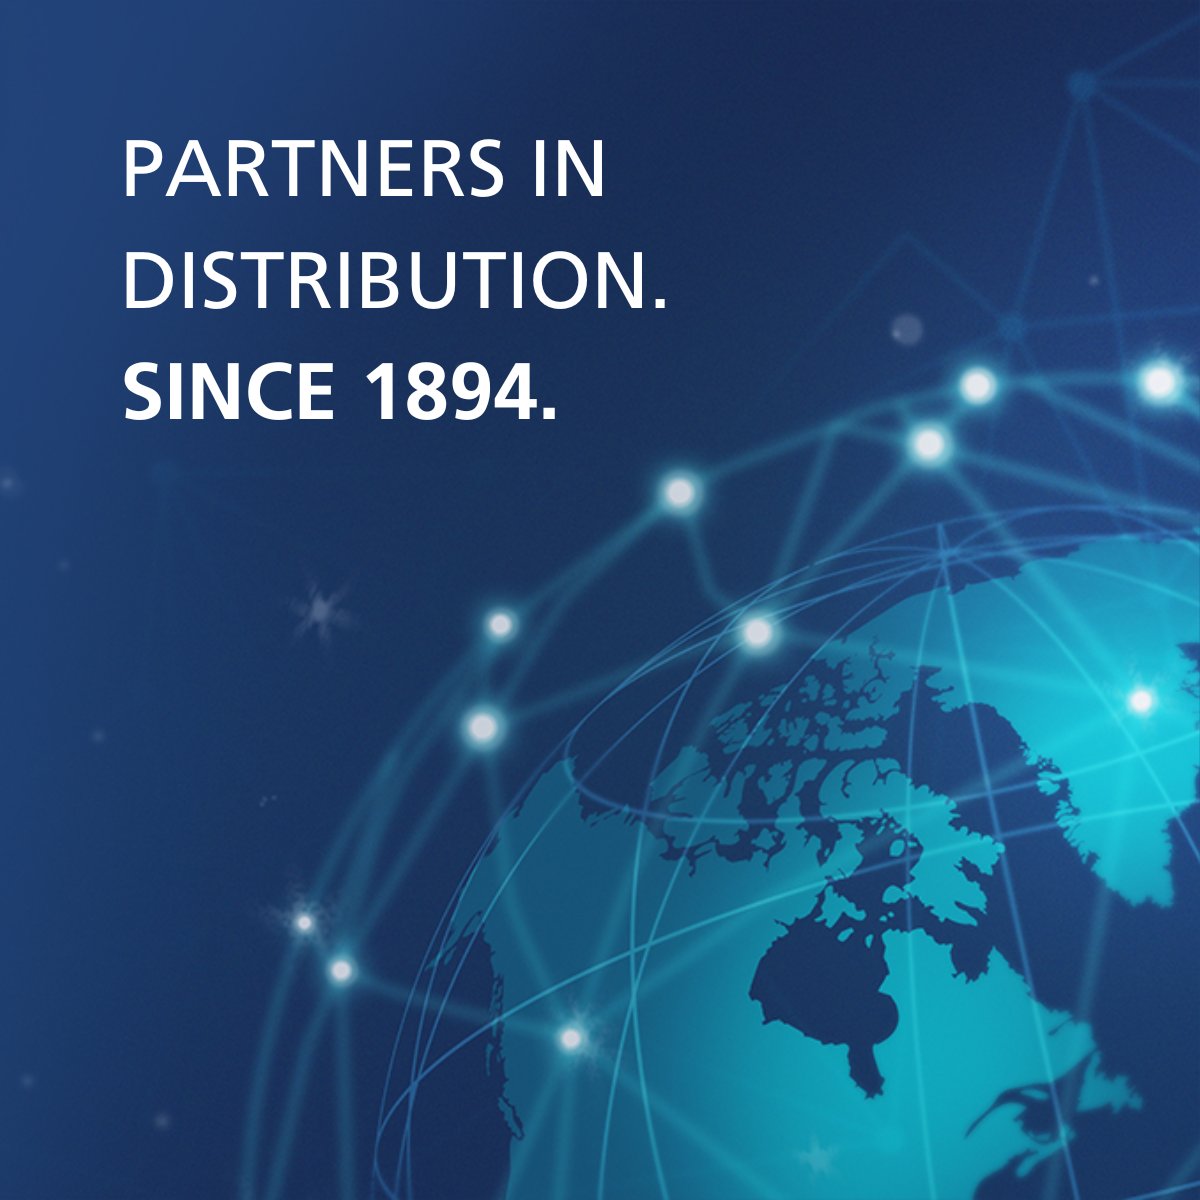 PARTNERS IN DISTRIBUTION. SINCE 1894. - 1